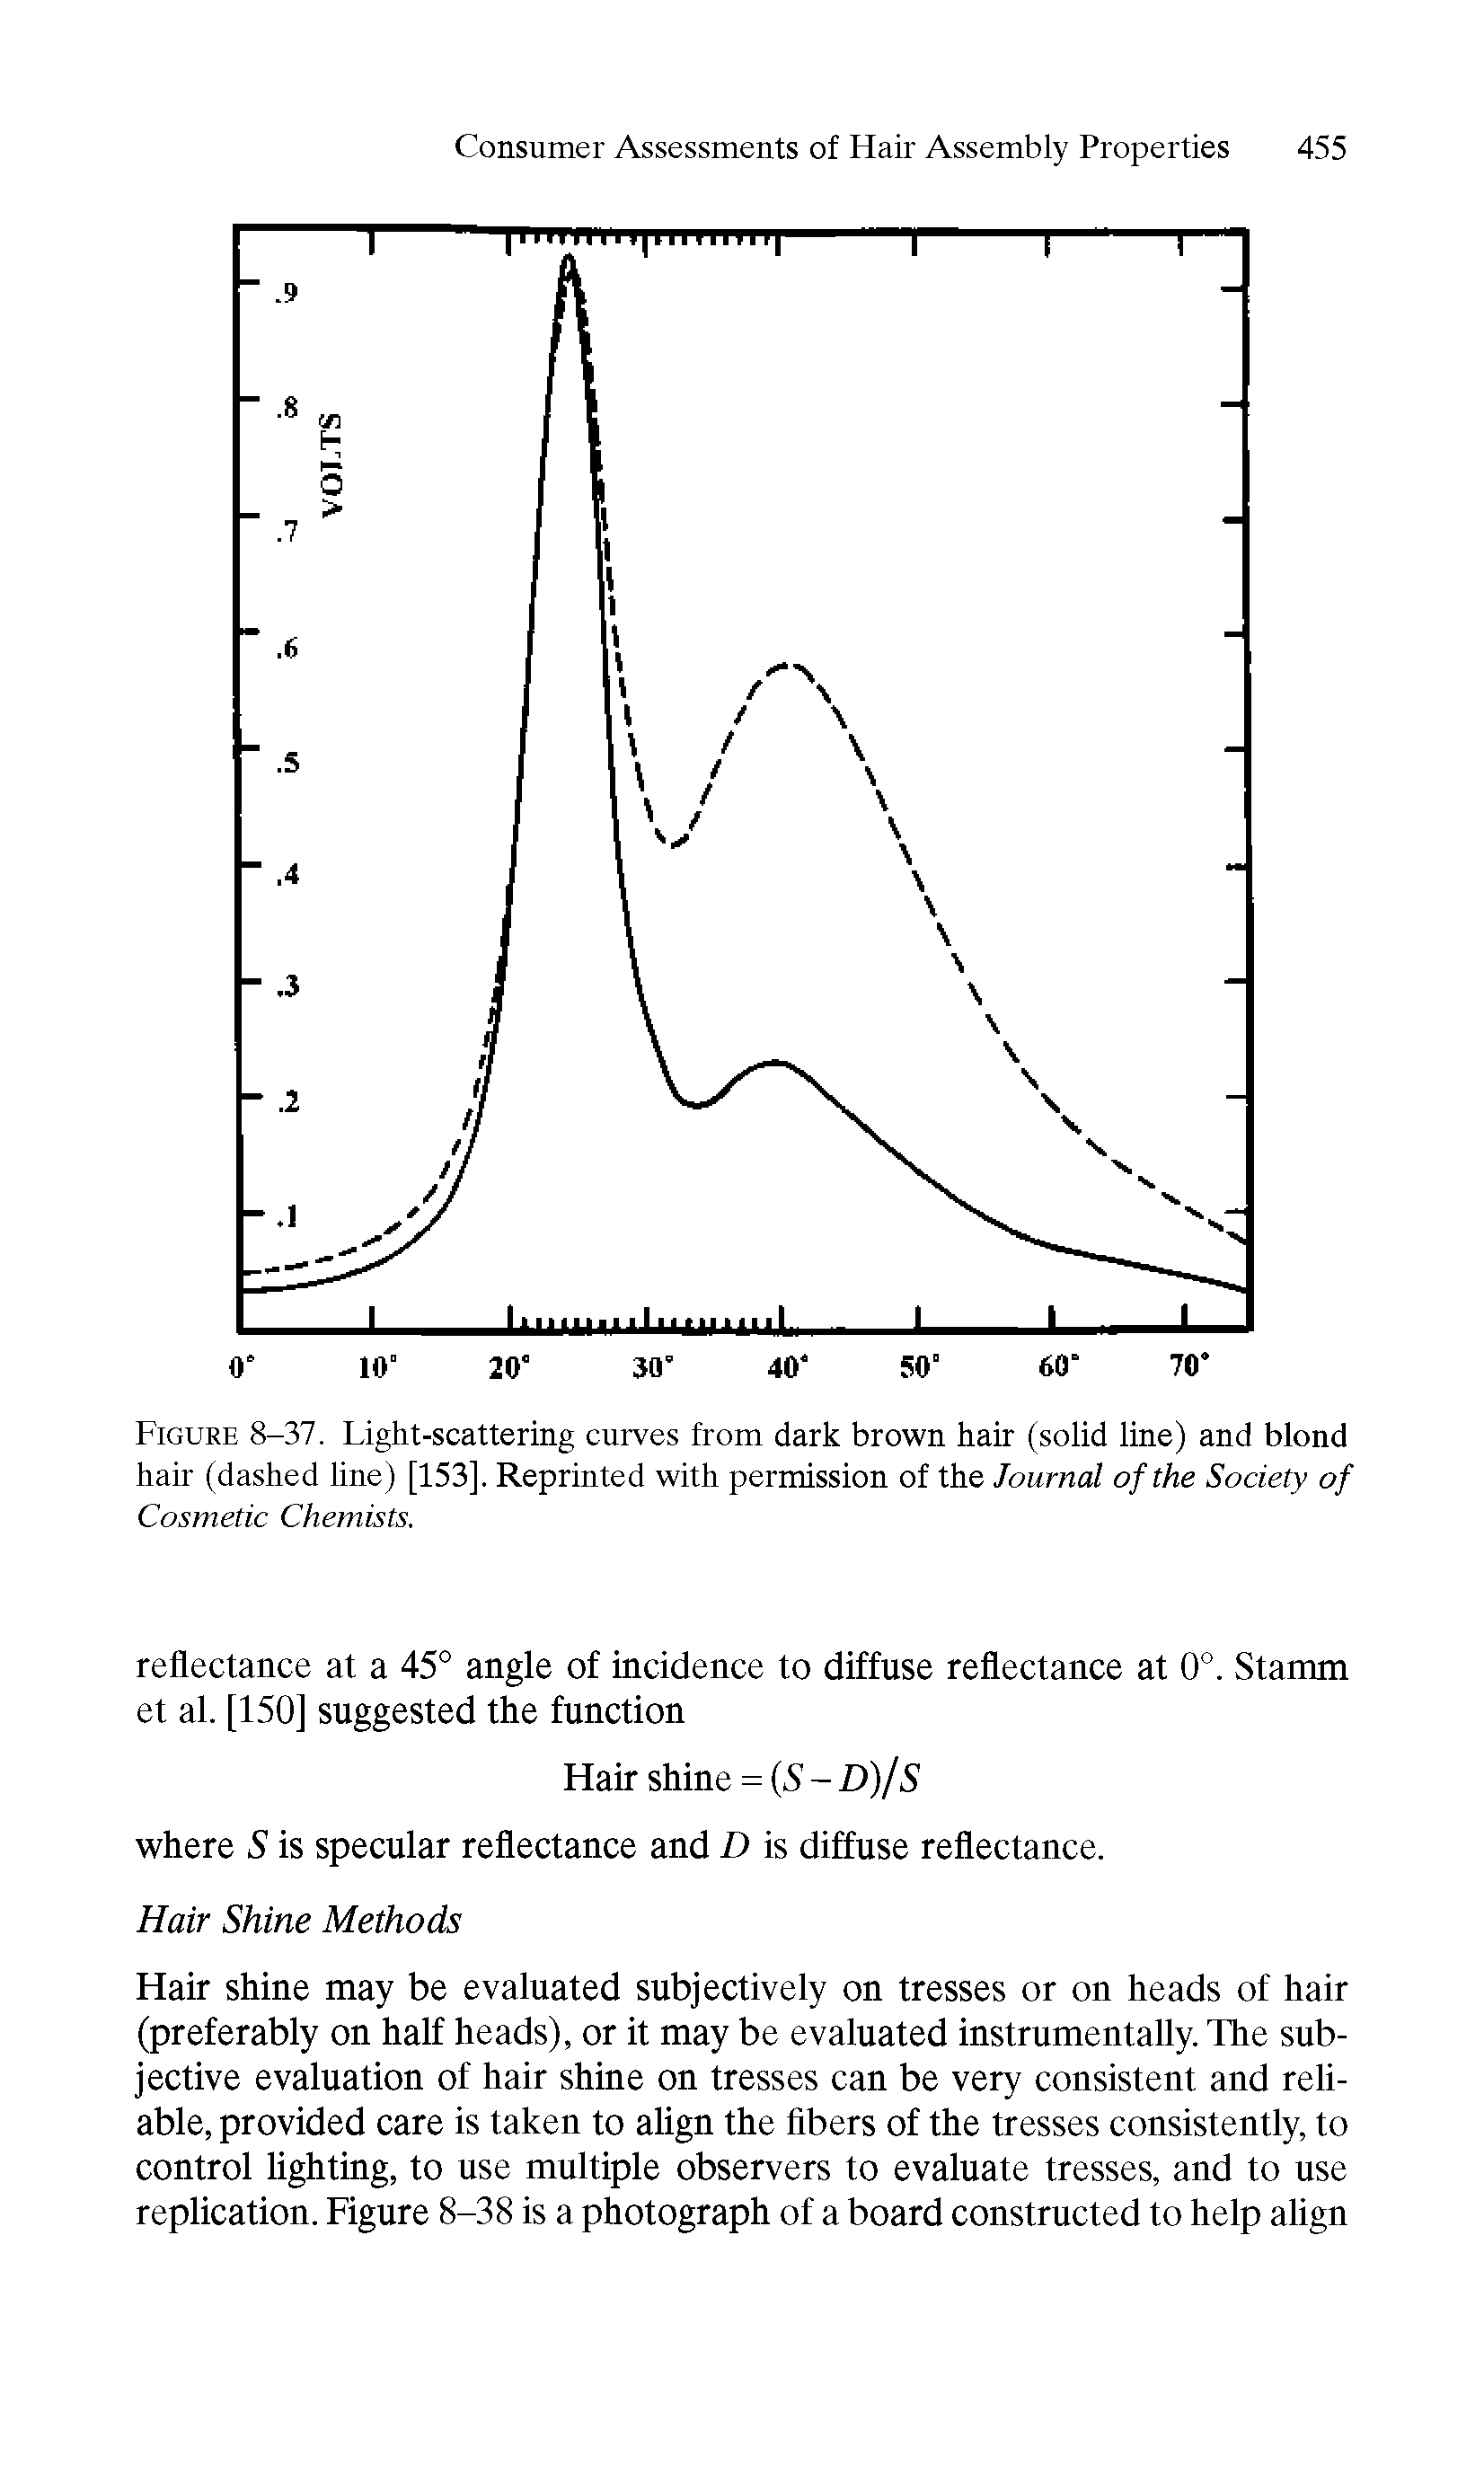 Figure 8-37. Light-scattering curves from dark brown hair (solid line) and blond hair (dashed line) [153], Reprinted with permission of the Journal of the Society of Cosmetic Chemists.